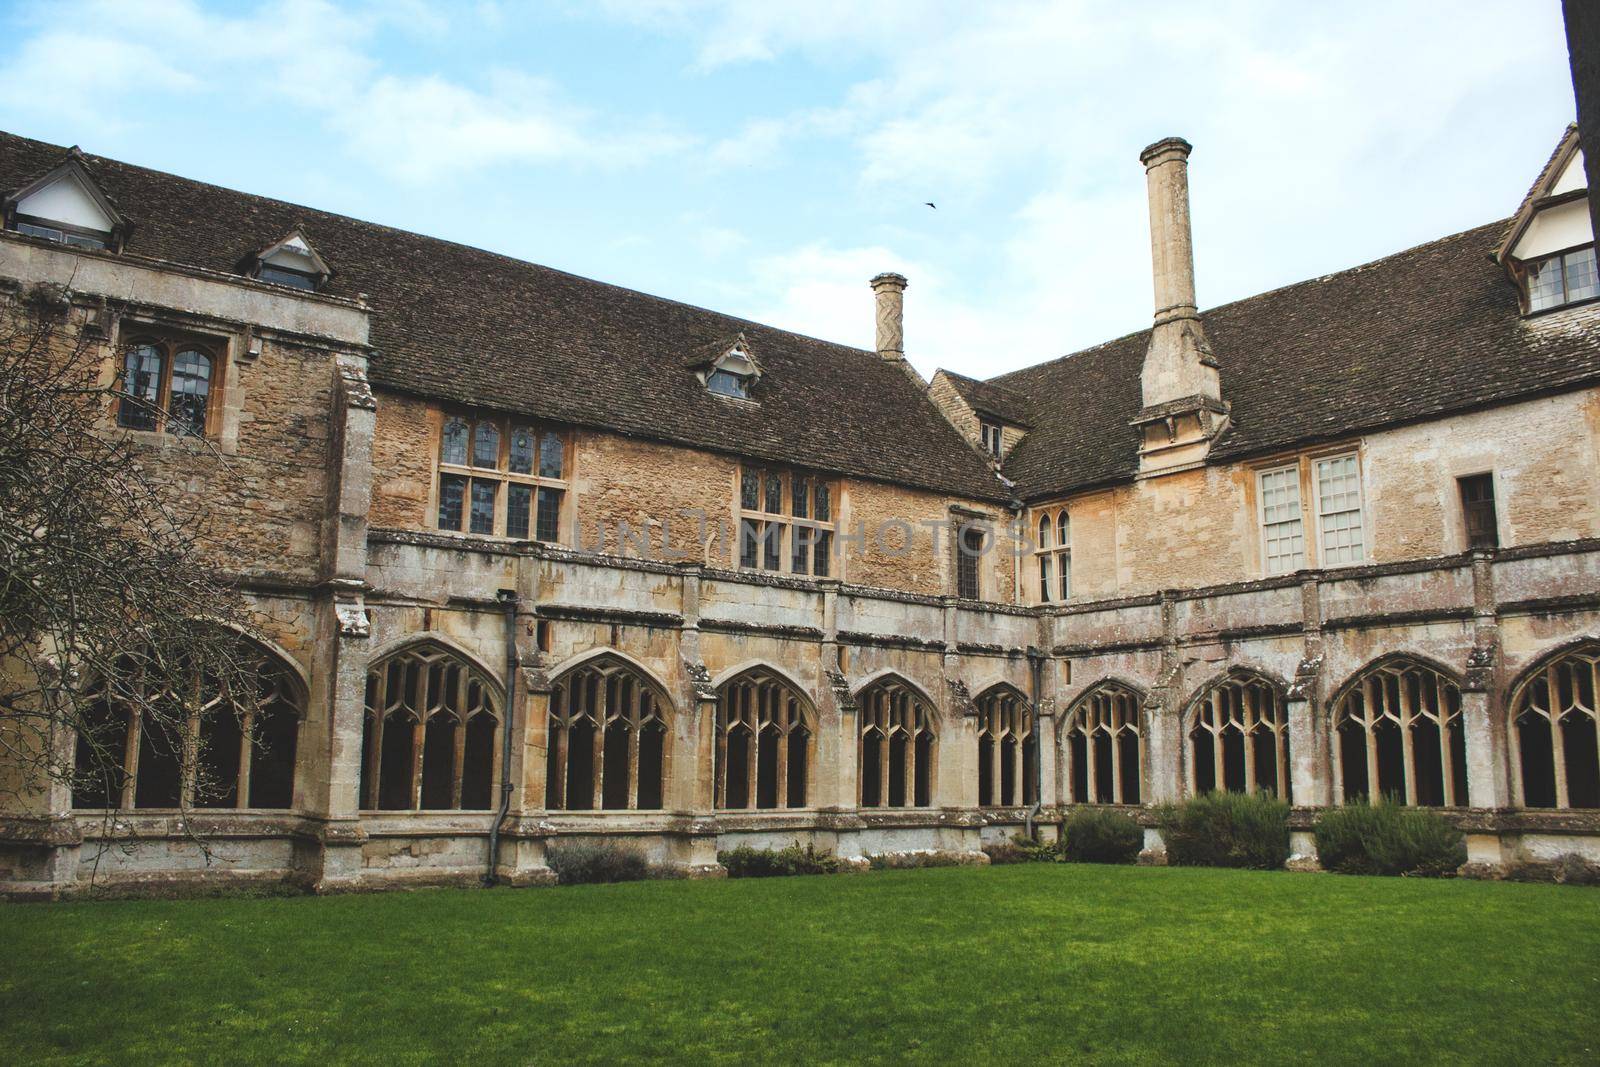 Lacock, England - March 01 2020: Shot of the cloisters and internal courtyard at Lacock Abbey